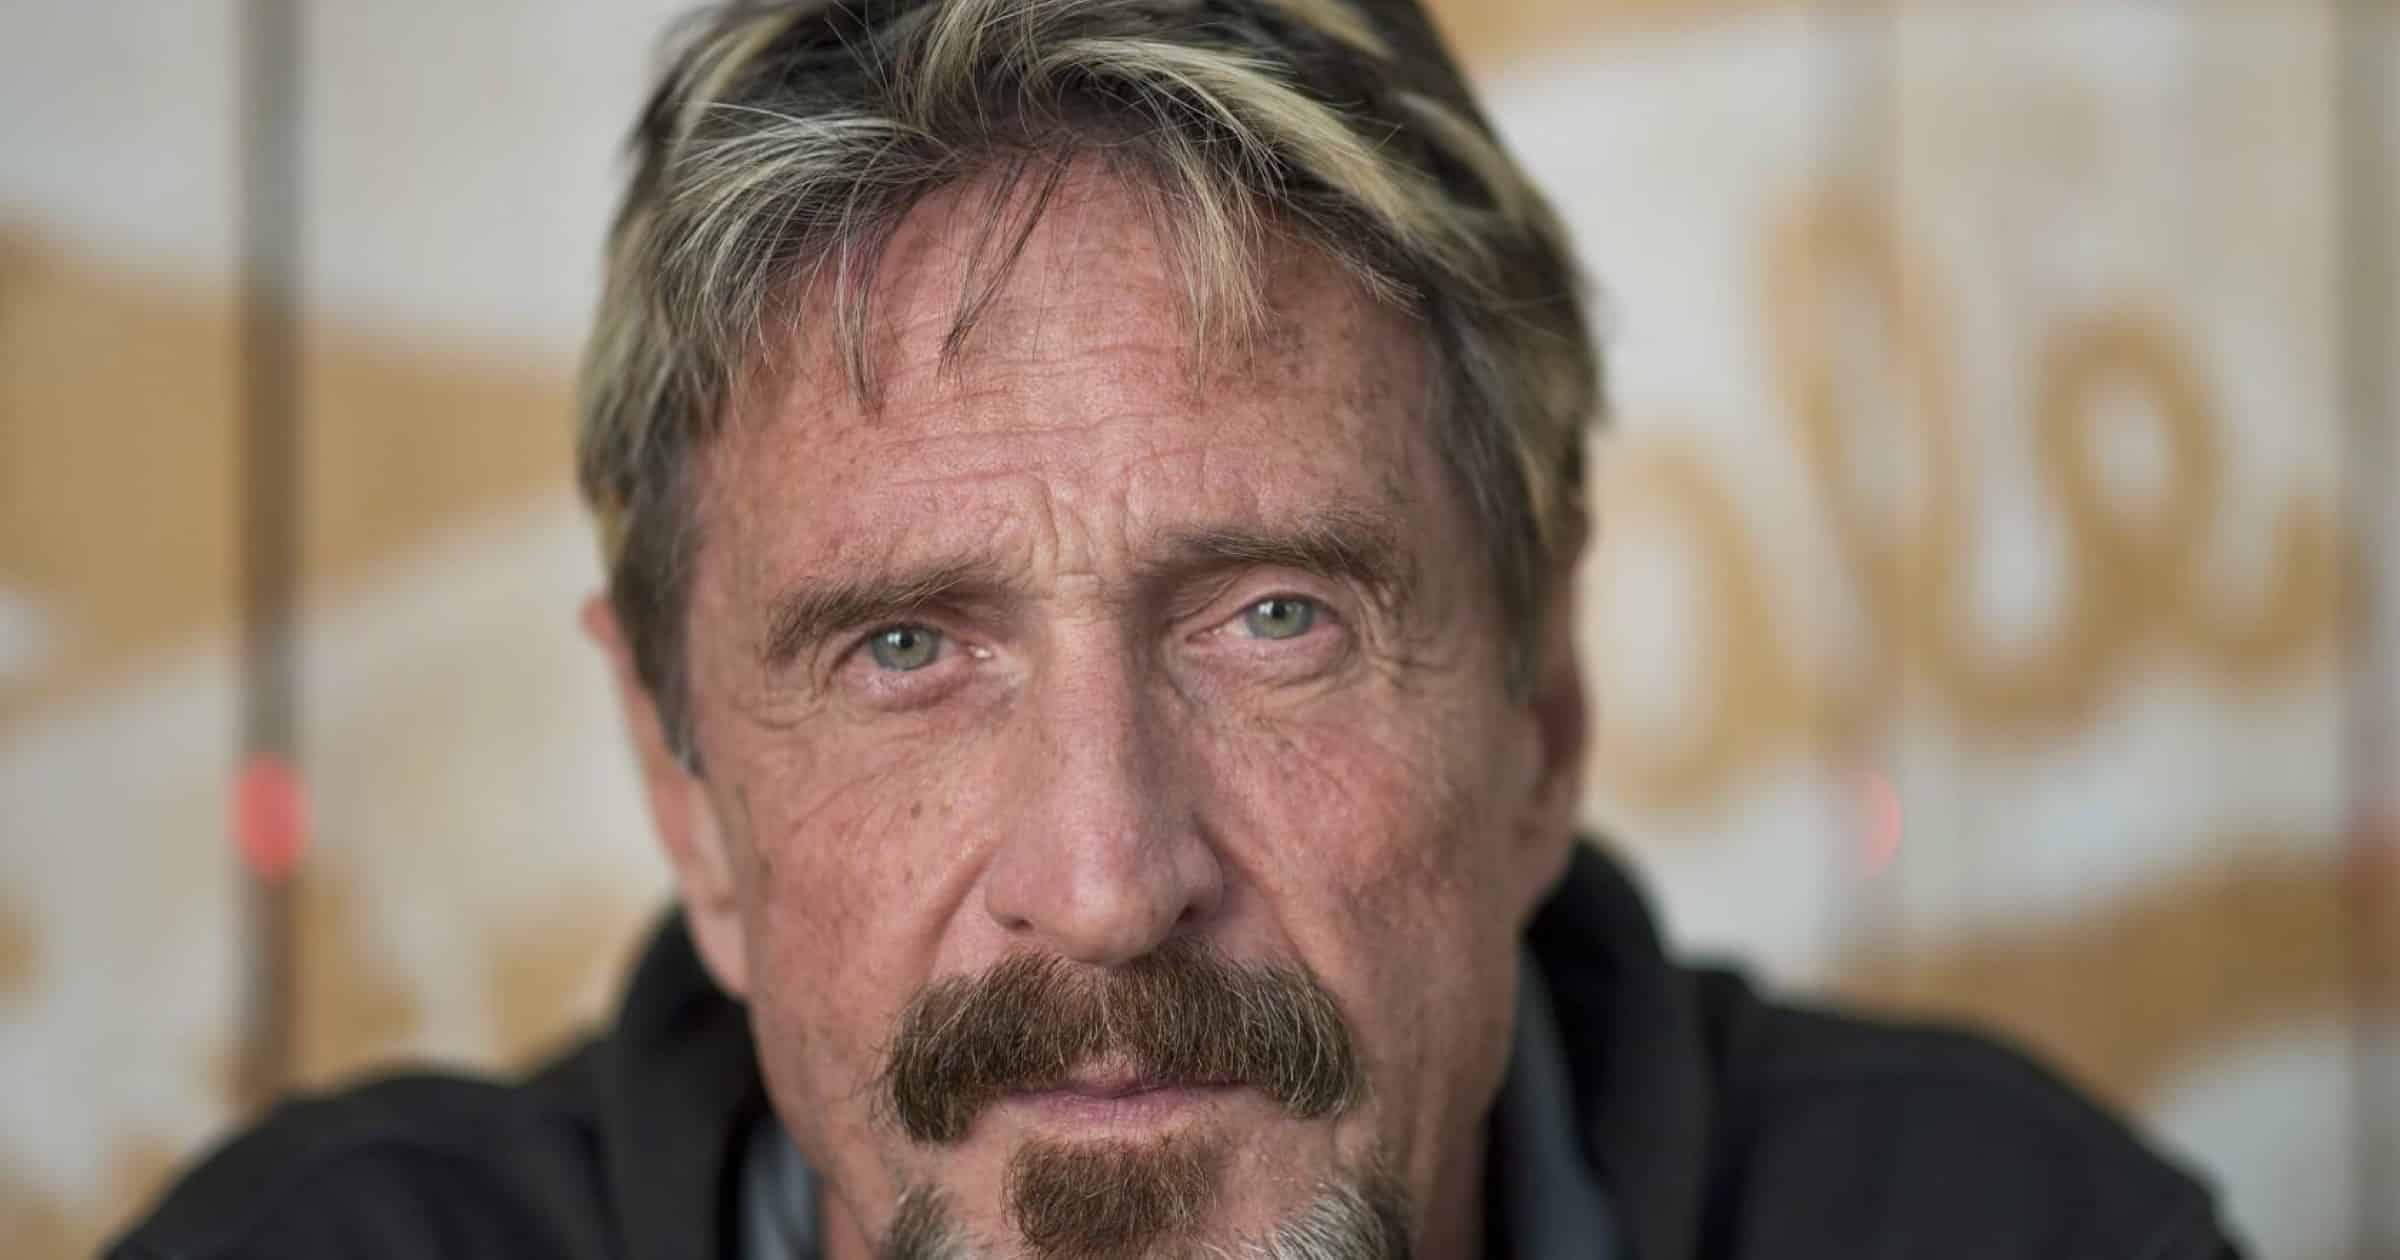 John McAfee Arrested for Tax Evasion